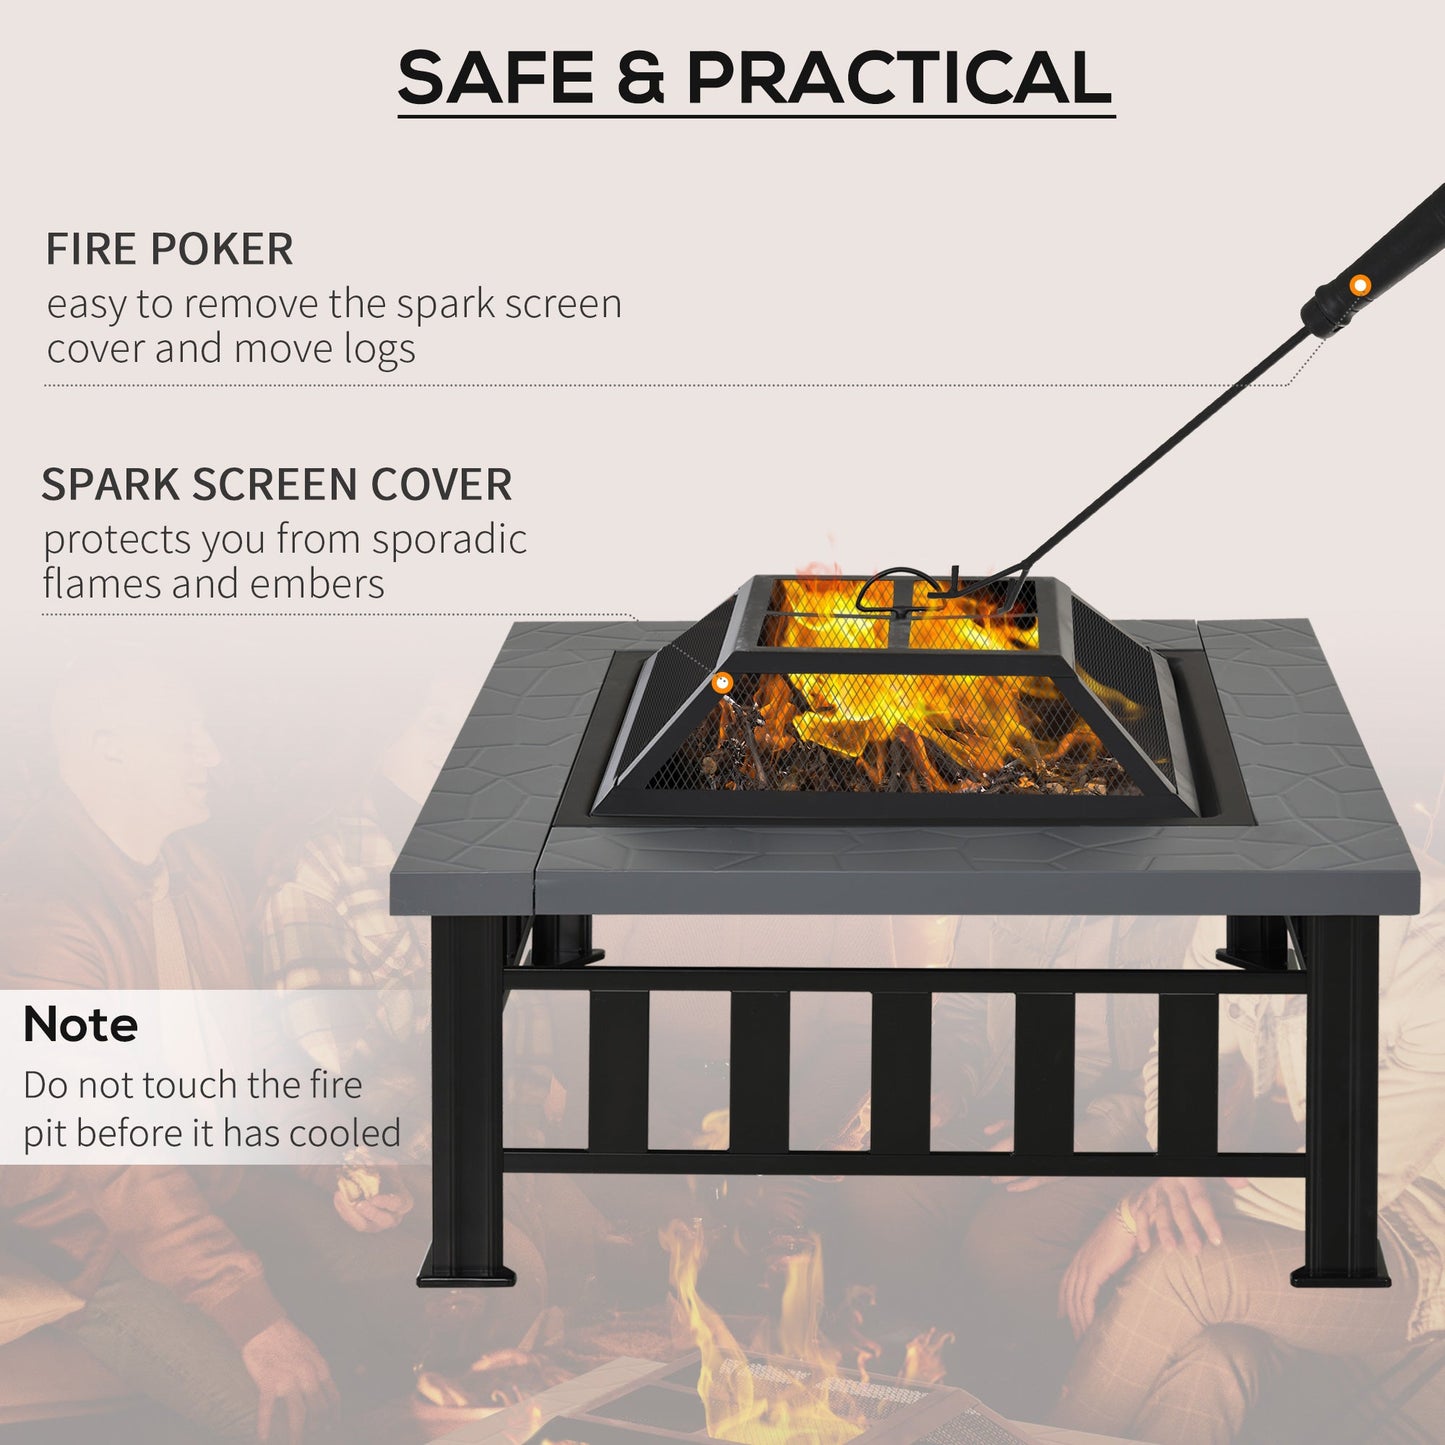 Outdoor and Garden-34" Outdoor Fire Pit Square Steel Wood Burning Firepit Bowl with Spark Screen, Waterproof Cover, Log Grate, Poker for Camping, BBQ, Bonfire - Outdoor Style Company